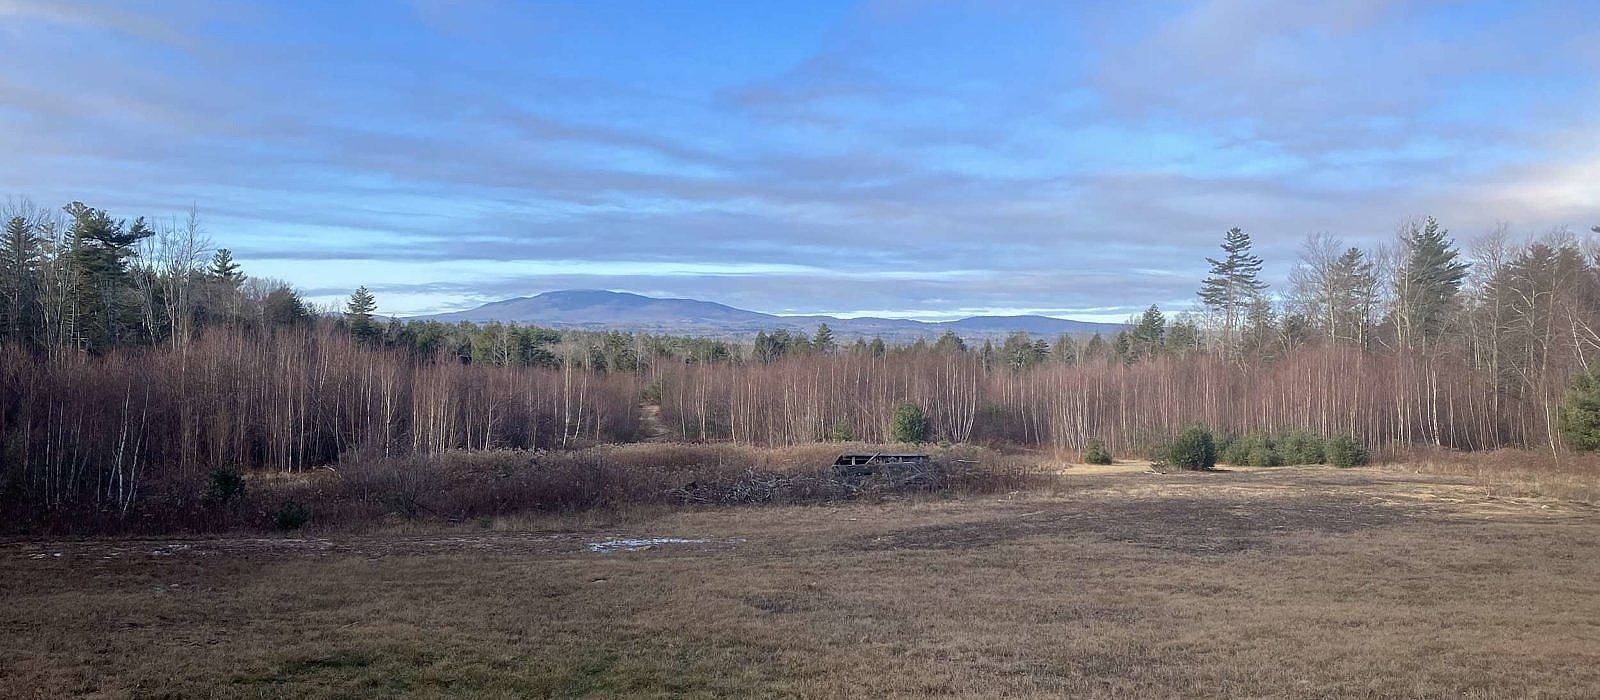 A view west across a field at Stony Brook Farm in Peterborough to Mount Monadnock in the distance. (photo © Eric Masterson)